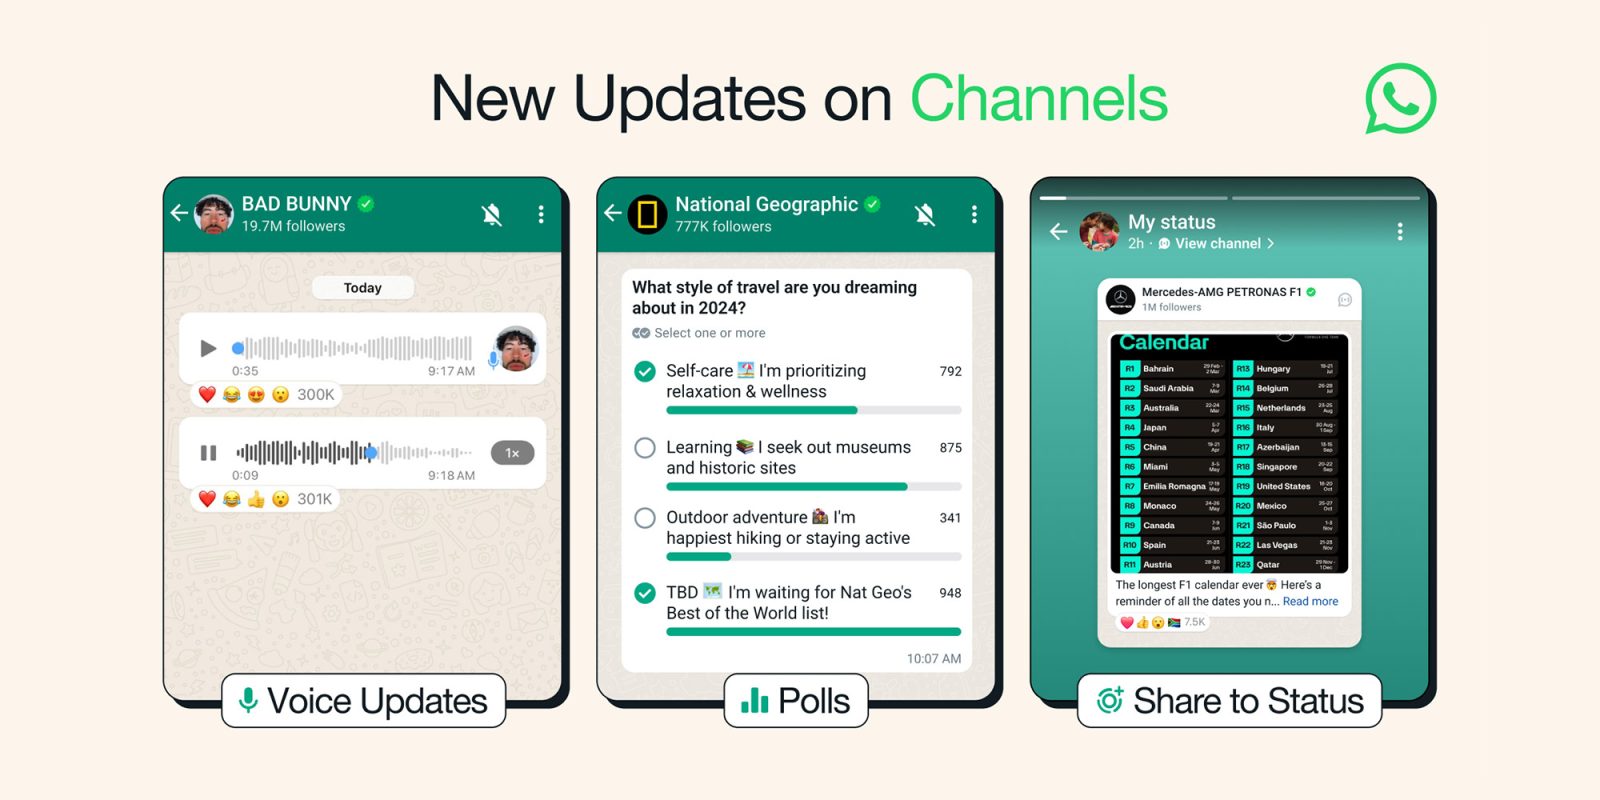 WhatsApp brings voice messages and polls to its Channels feature